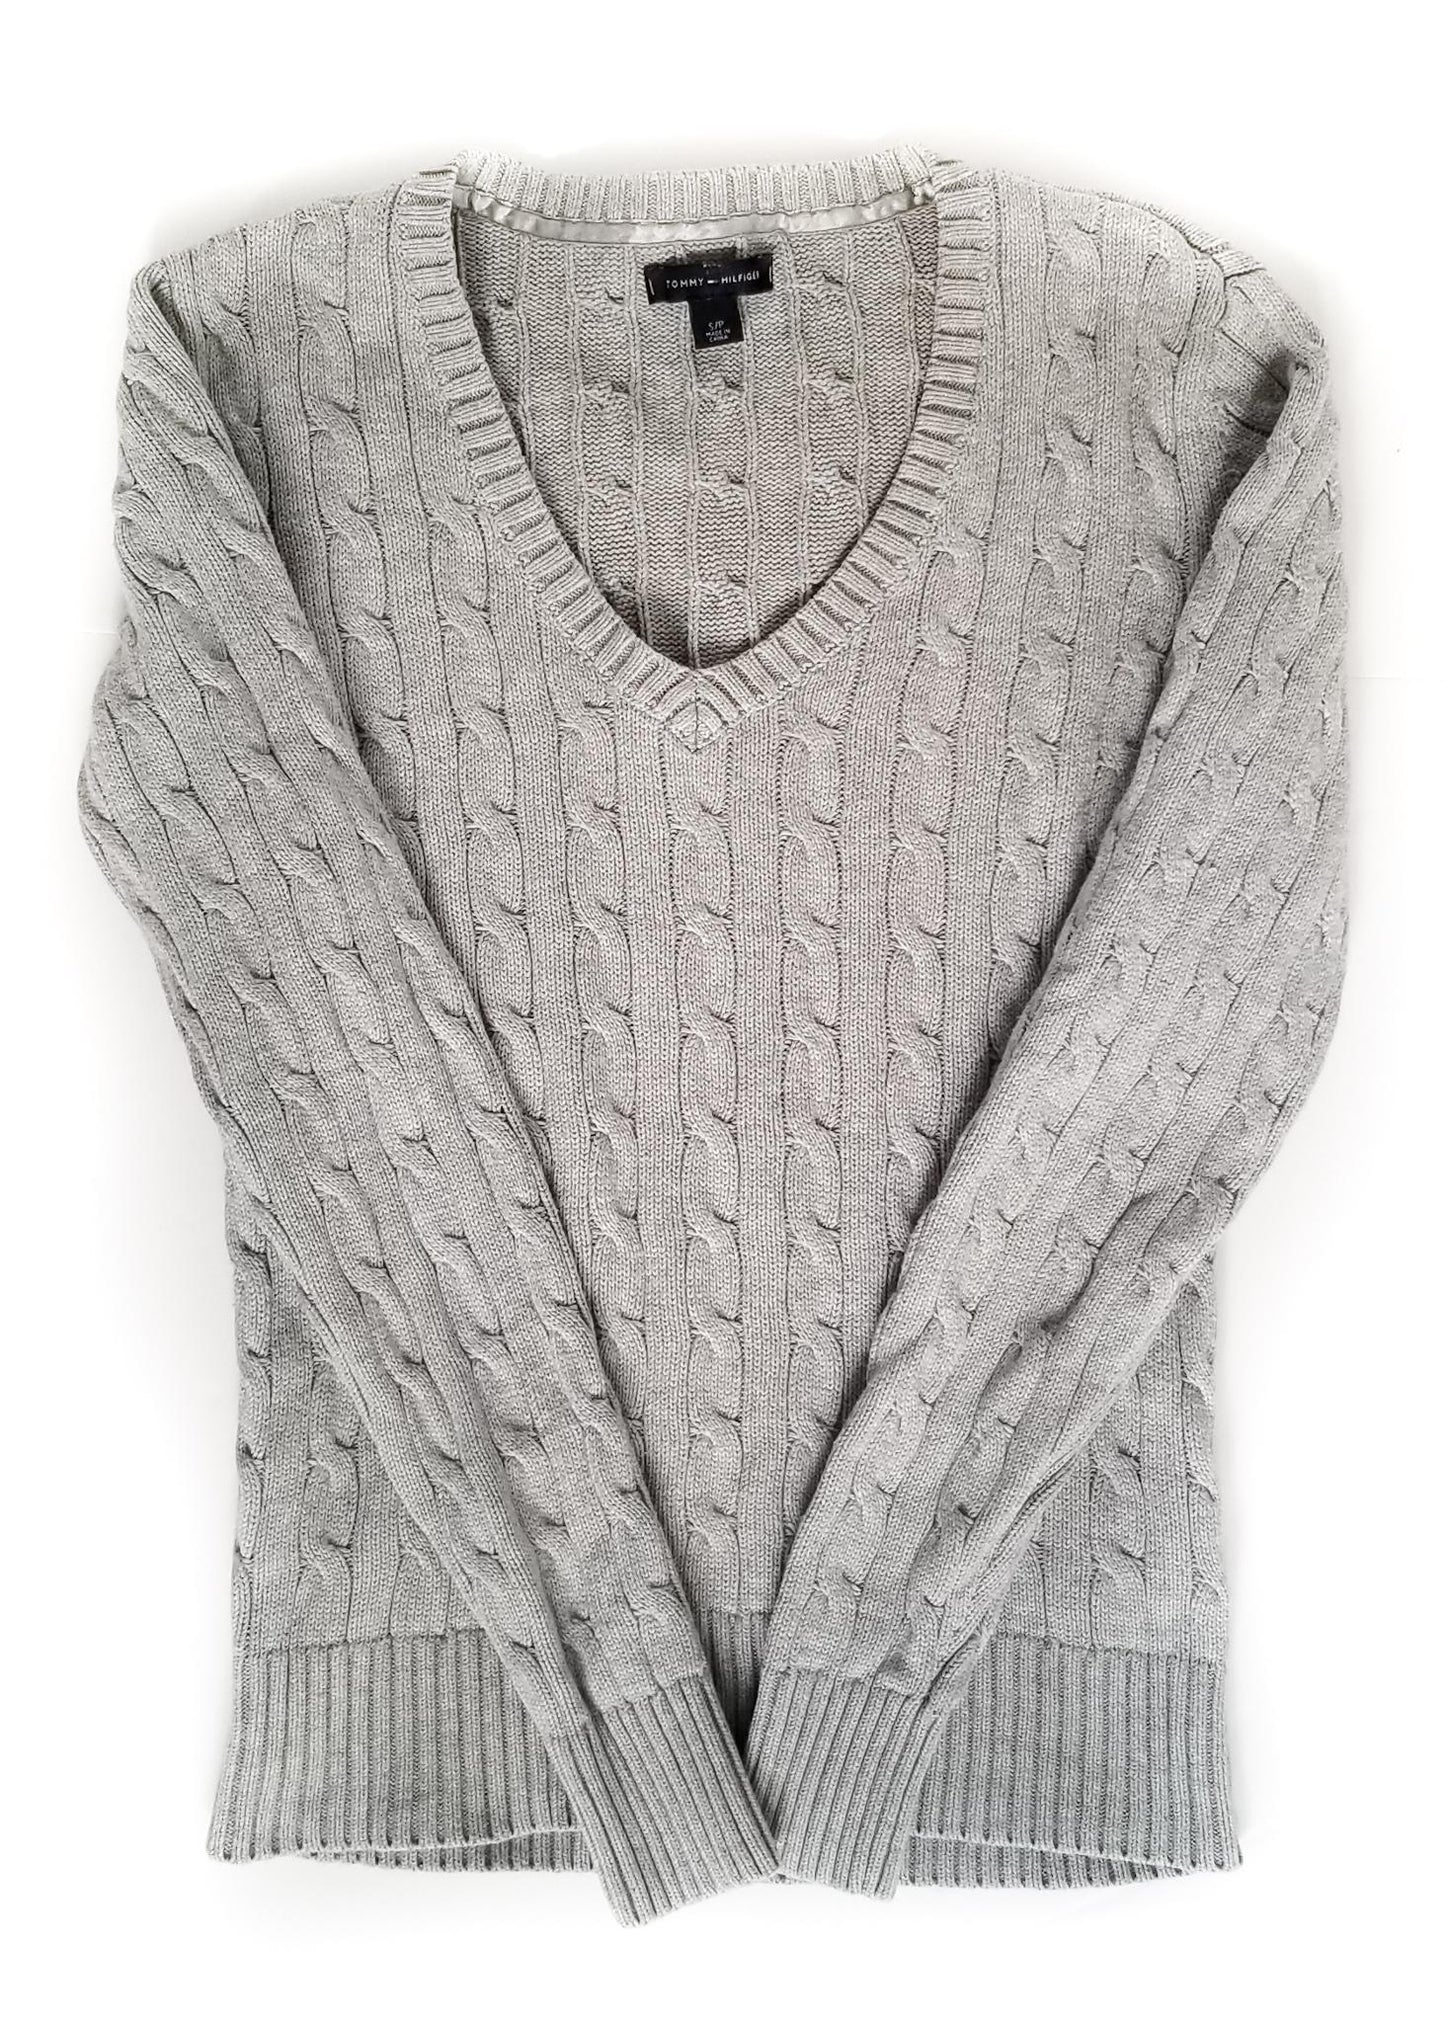 Tommy Hilfiger V Neck Cable Knit Sweater - Grey - Women's Small